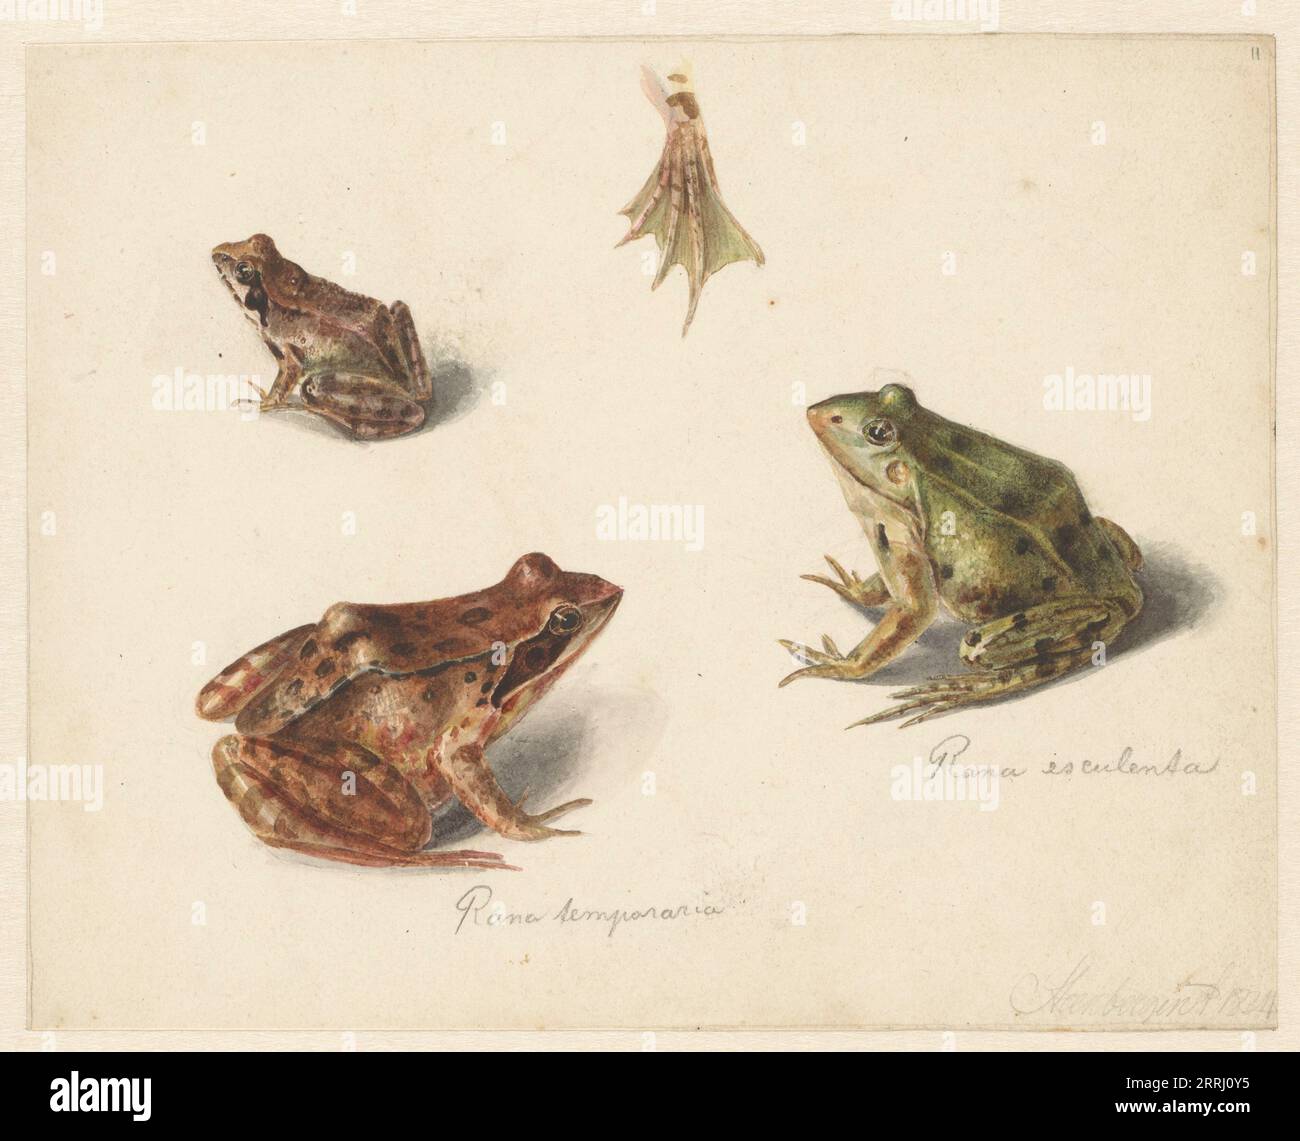 Sheet of studies: green water frog on the left, and brown land frog on the right, 1834. Stock Photo